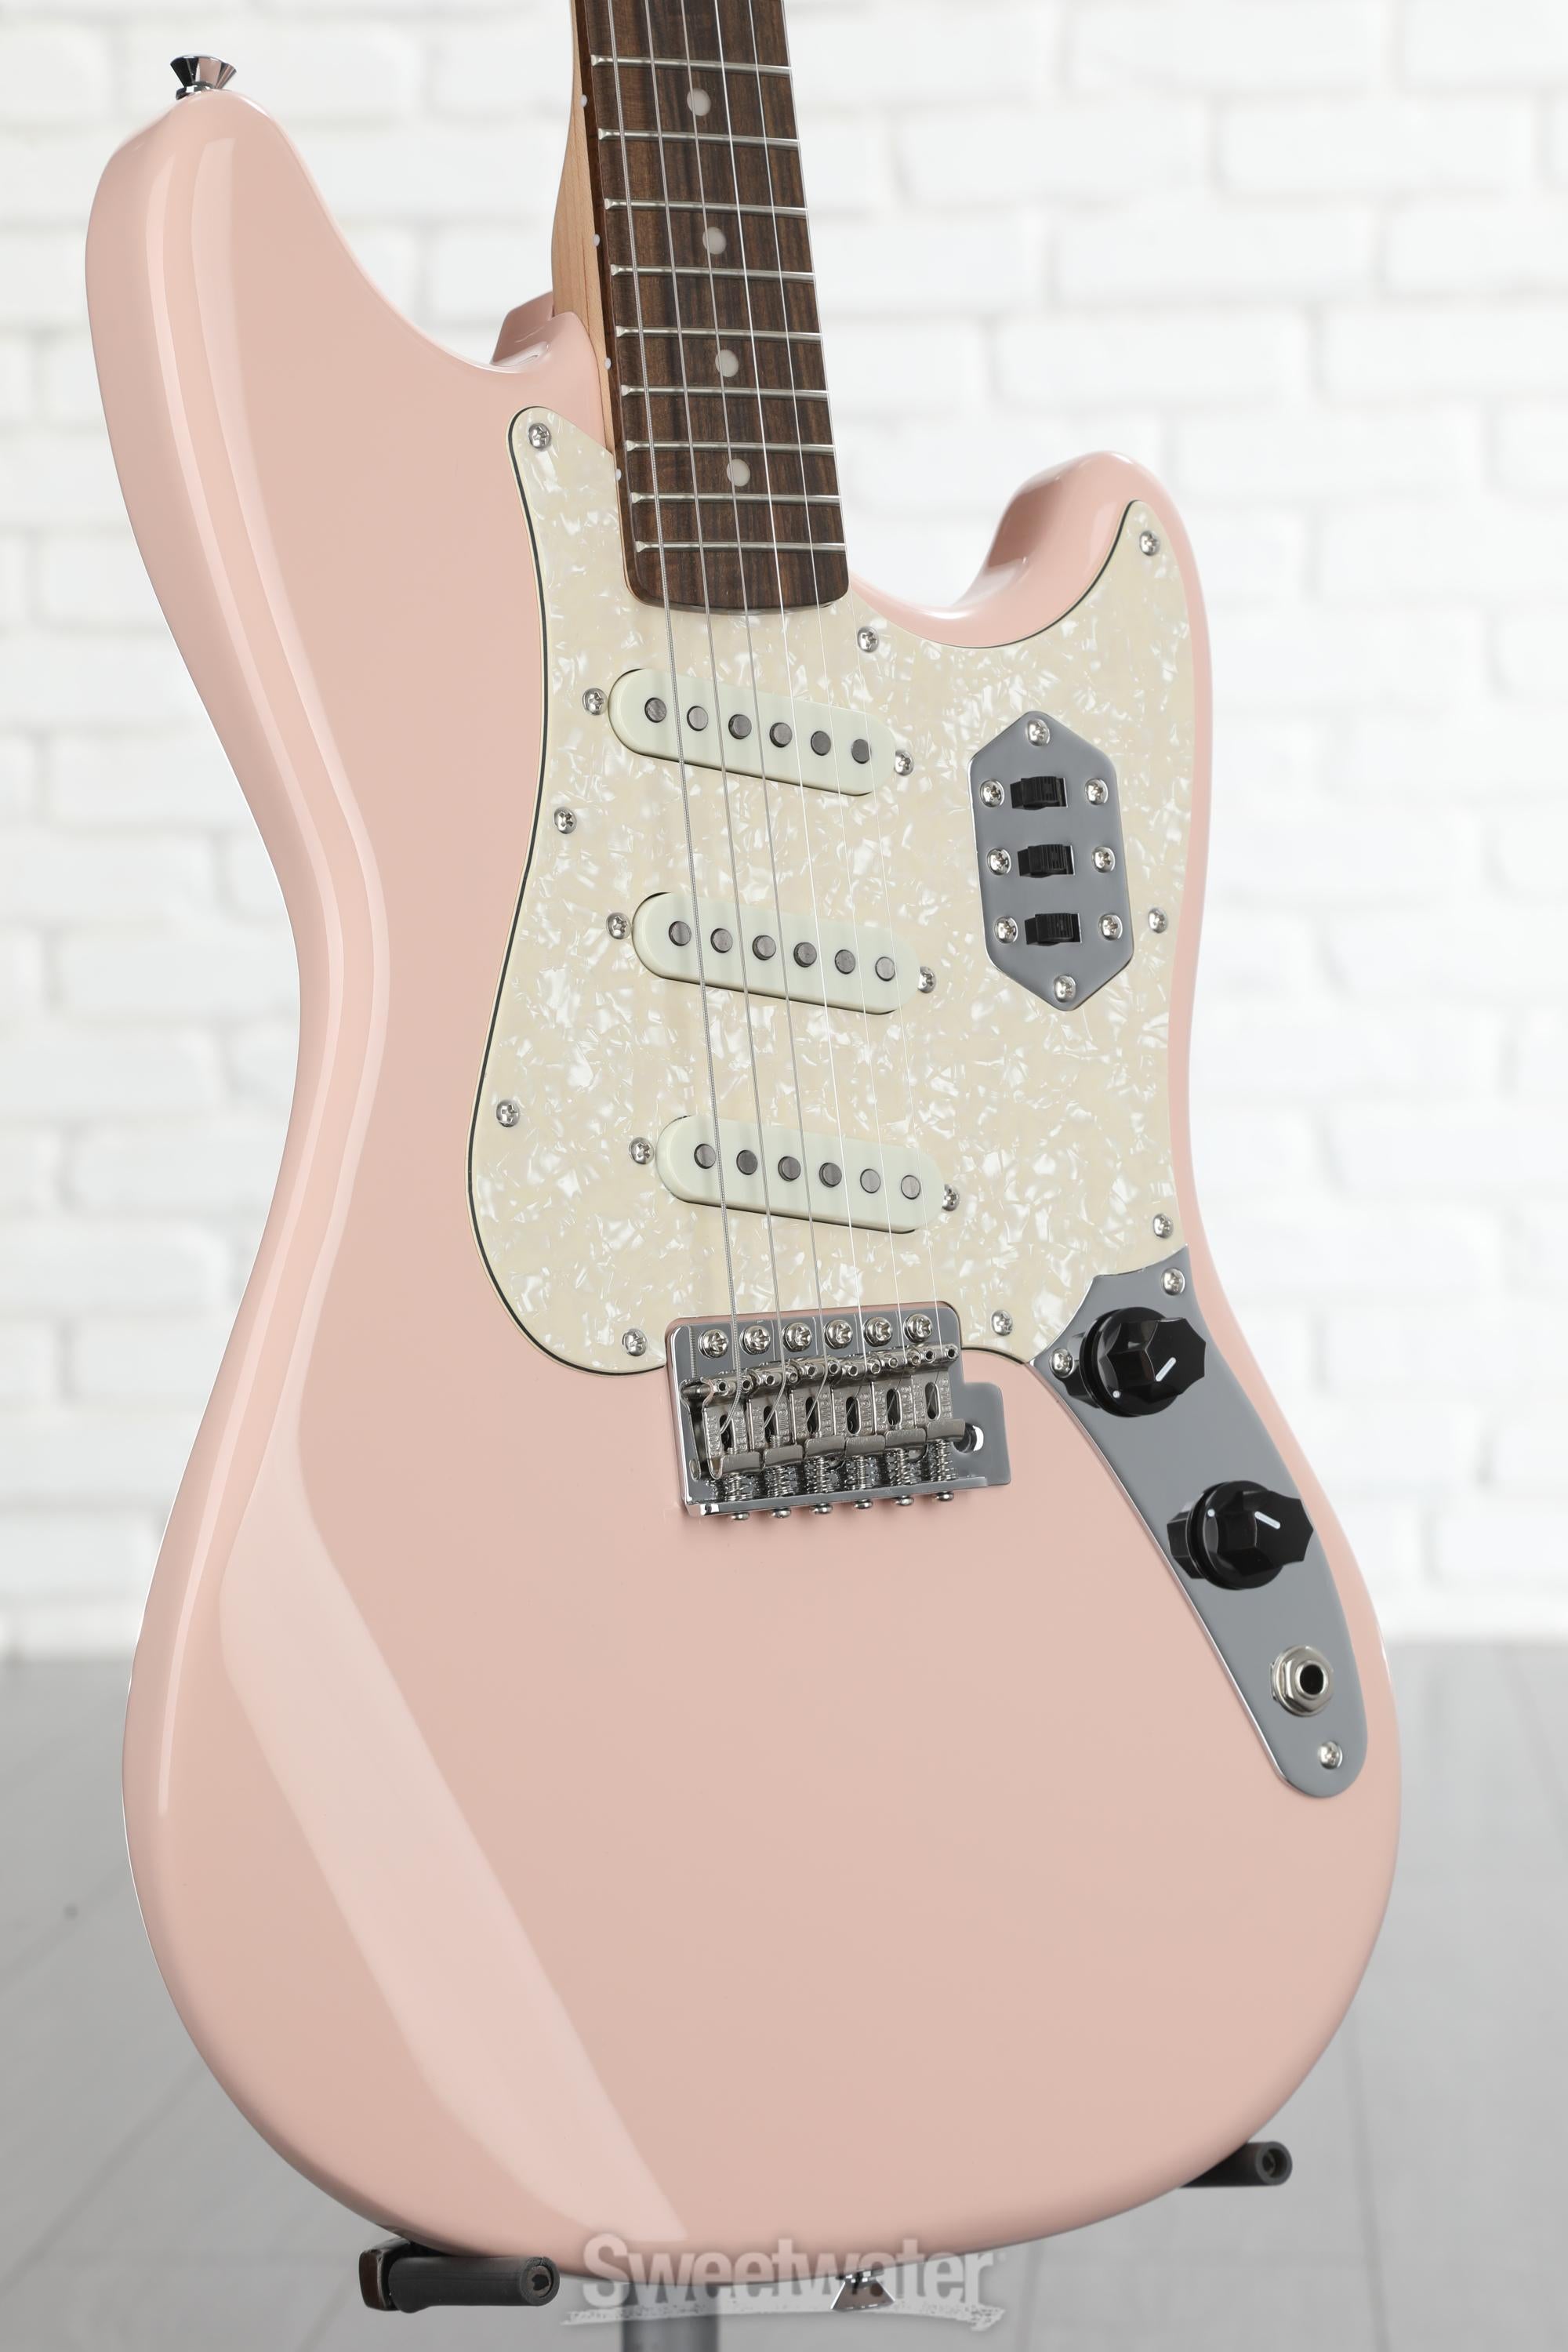 Squier Paranormal Cyclone Electric Guitar - Shell Pink | Sweetwater